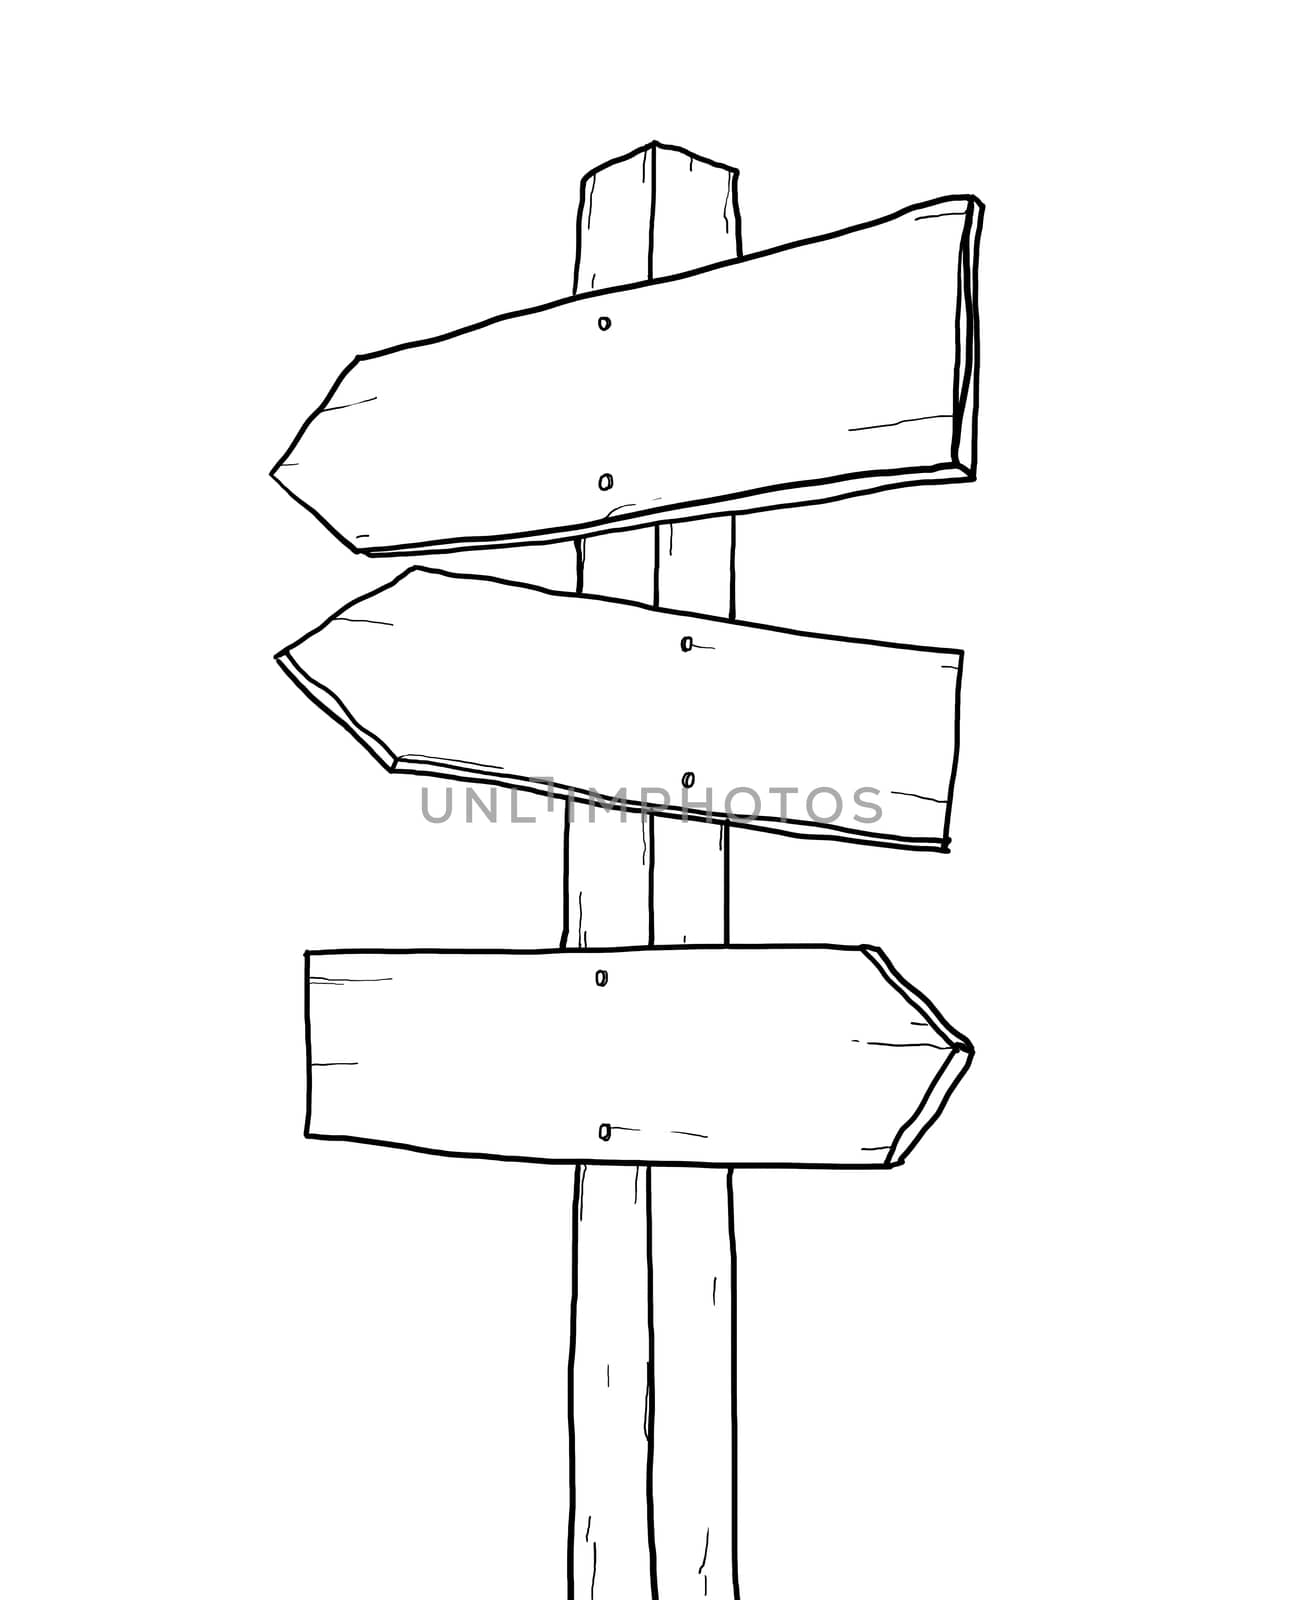 old sign junction lineart illustration by paidaen